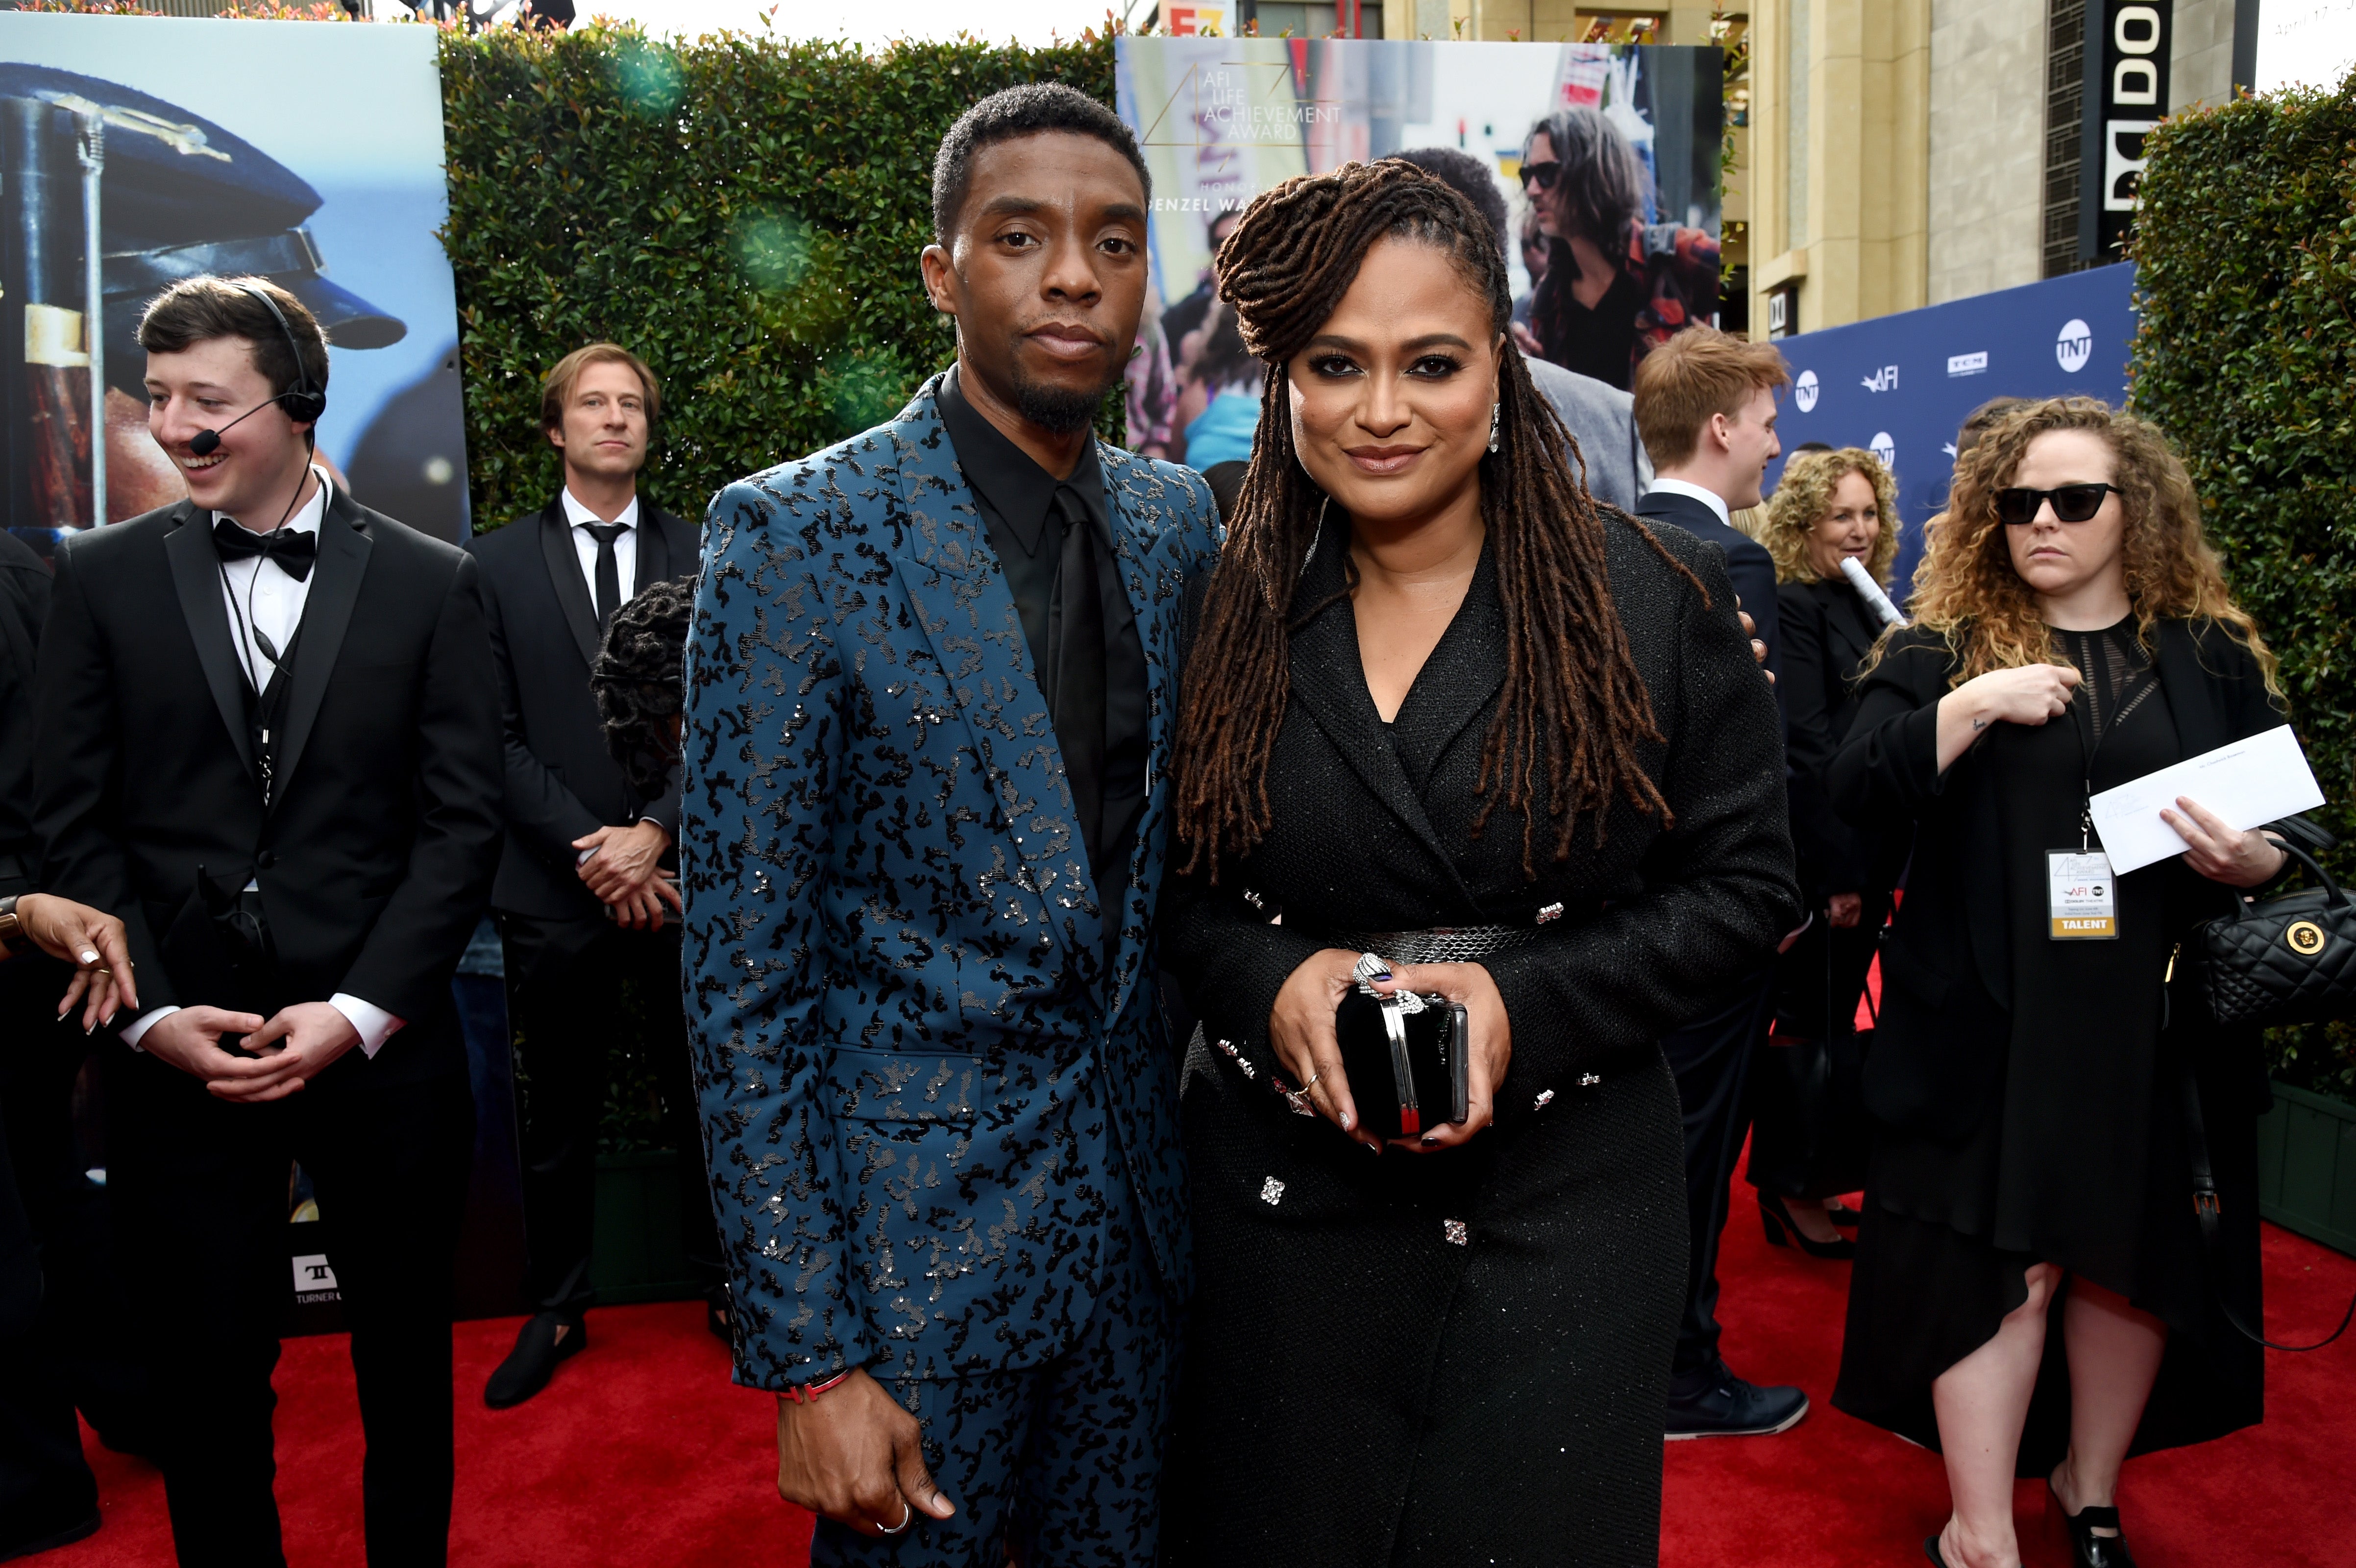 Ava DuVernay, Chadwick Boseman, Issa Rae, And More Celebs Out And About